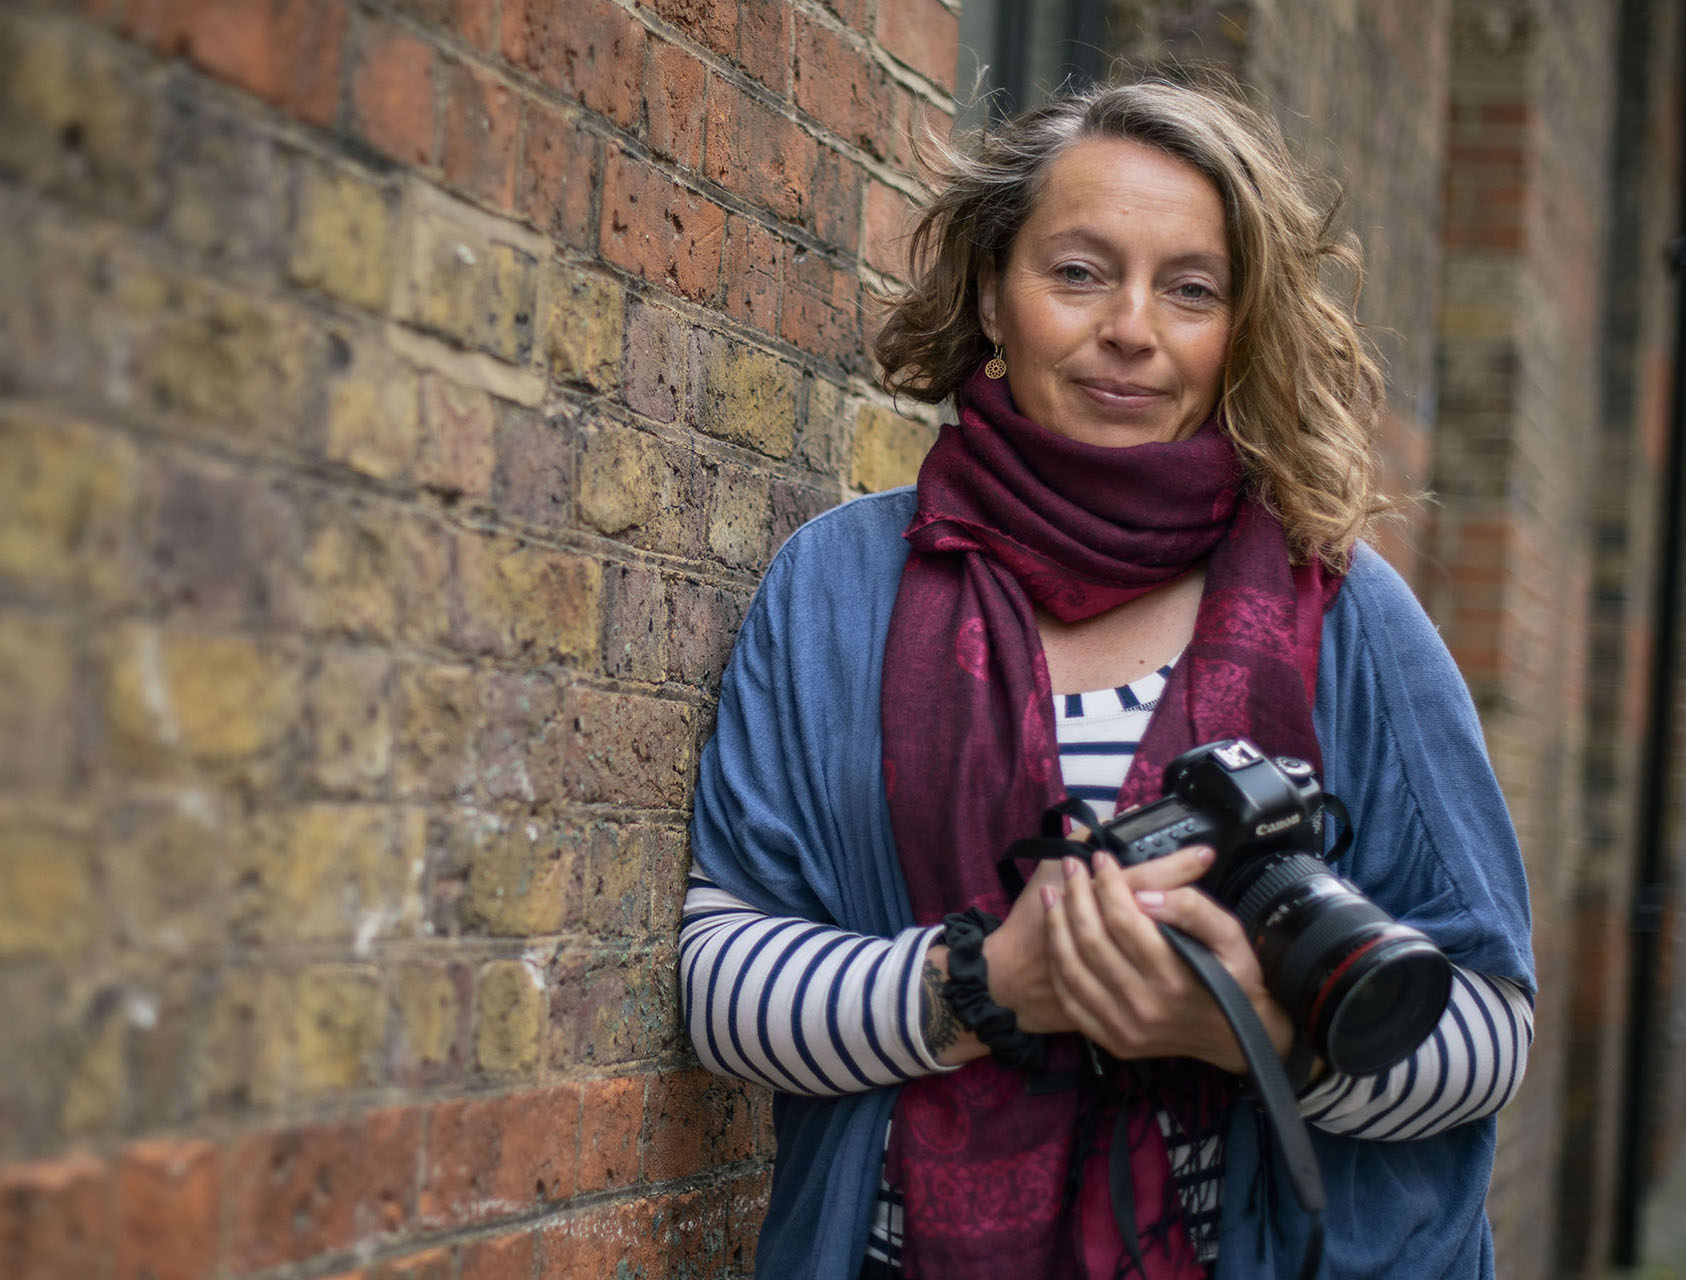 Alison Baskerville, photographer/Photo: Alison Beckwith from exhibit at Oxford Festival of Arts